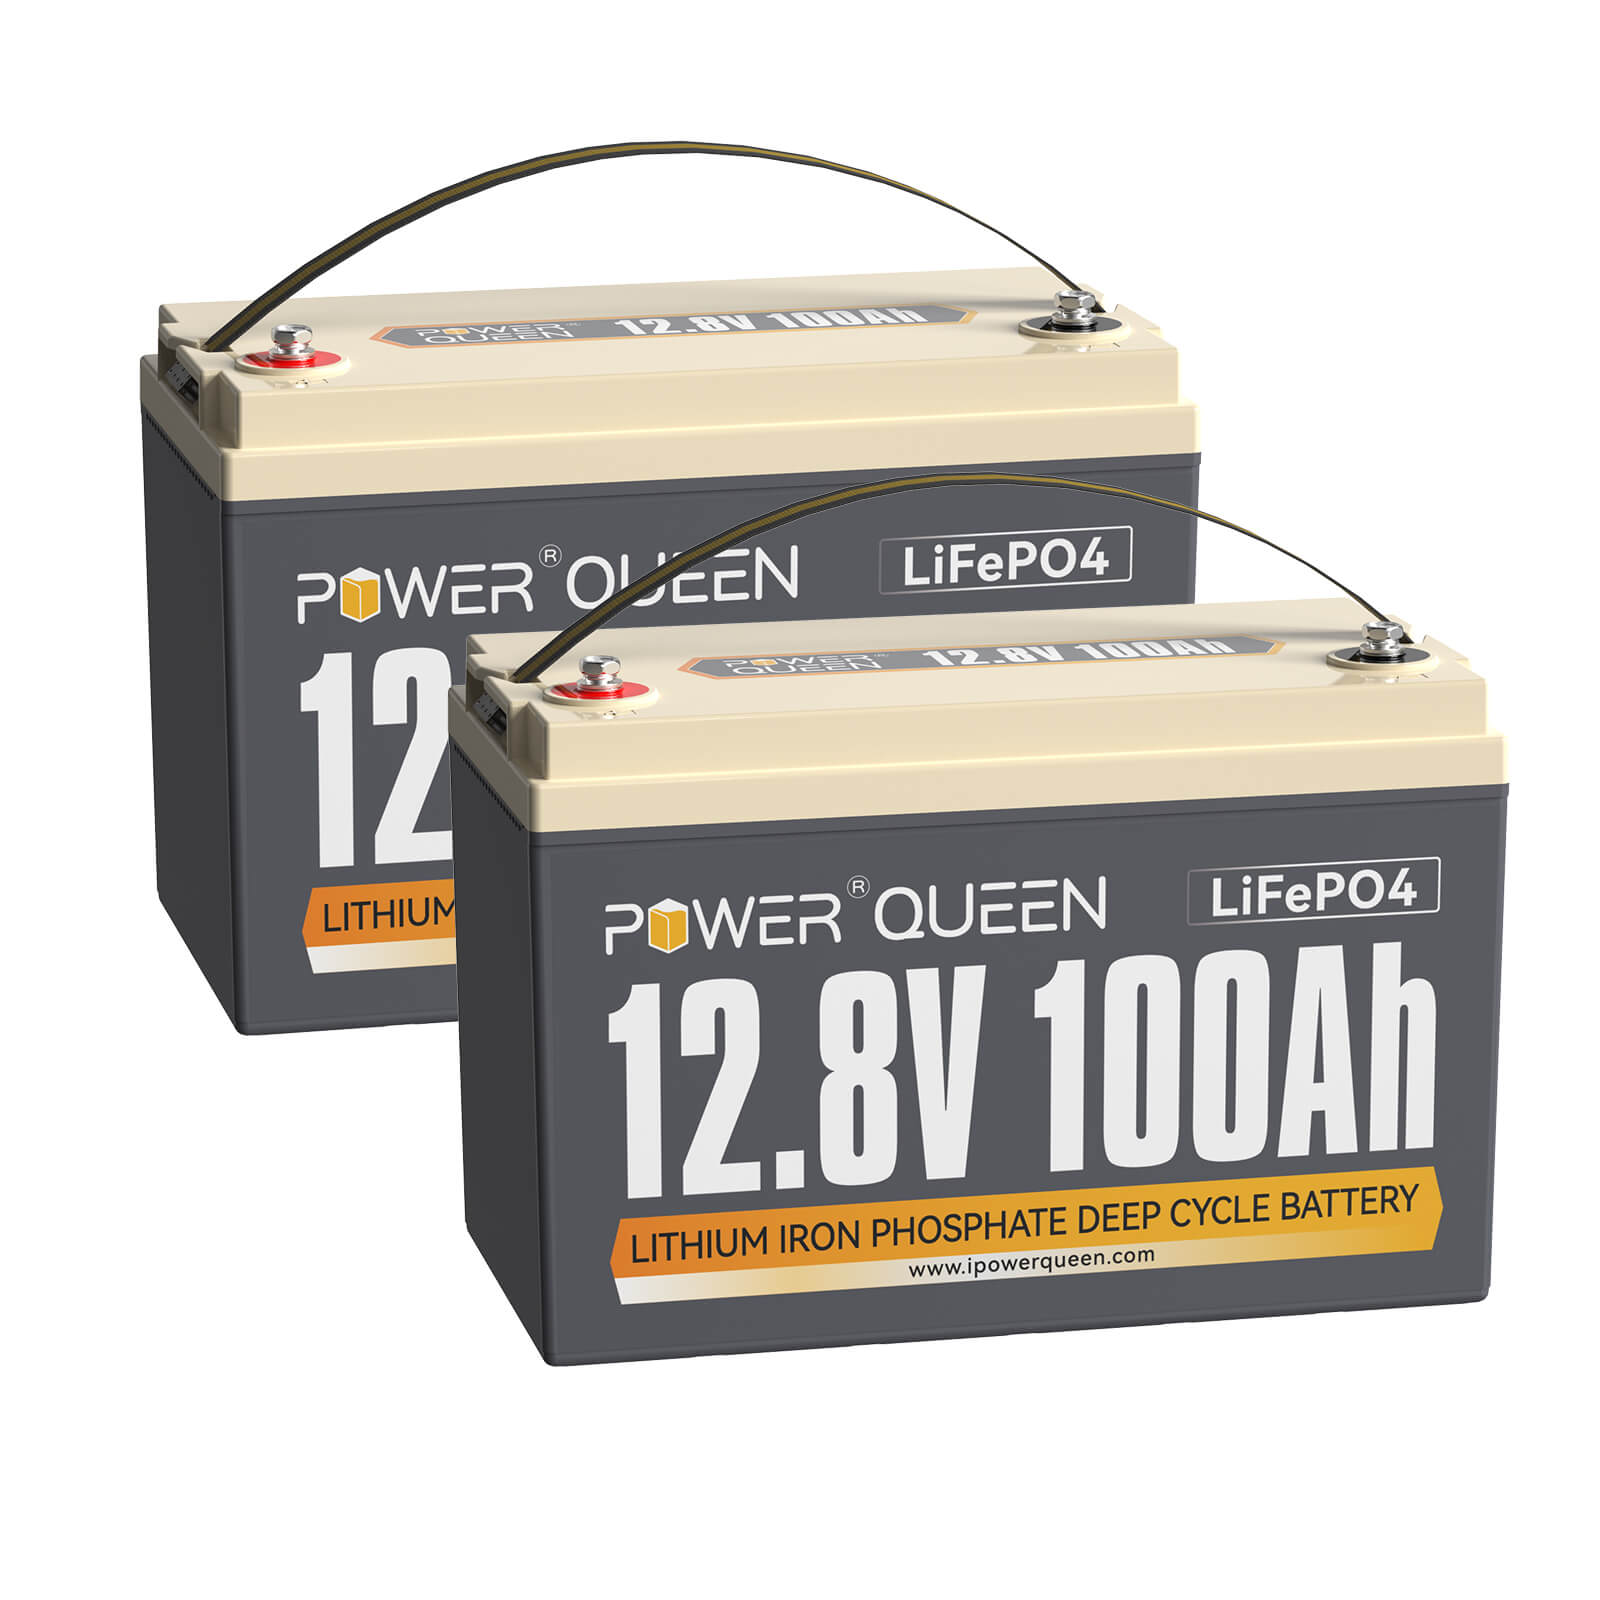 Power Queen 12V 100Ah LiFePO4 battery, built-in 100A BMS